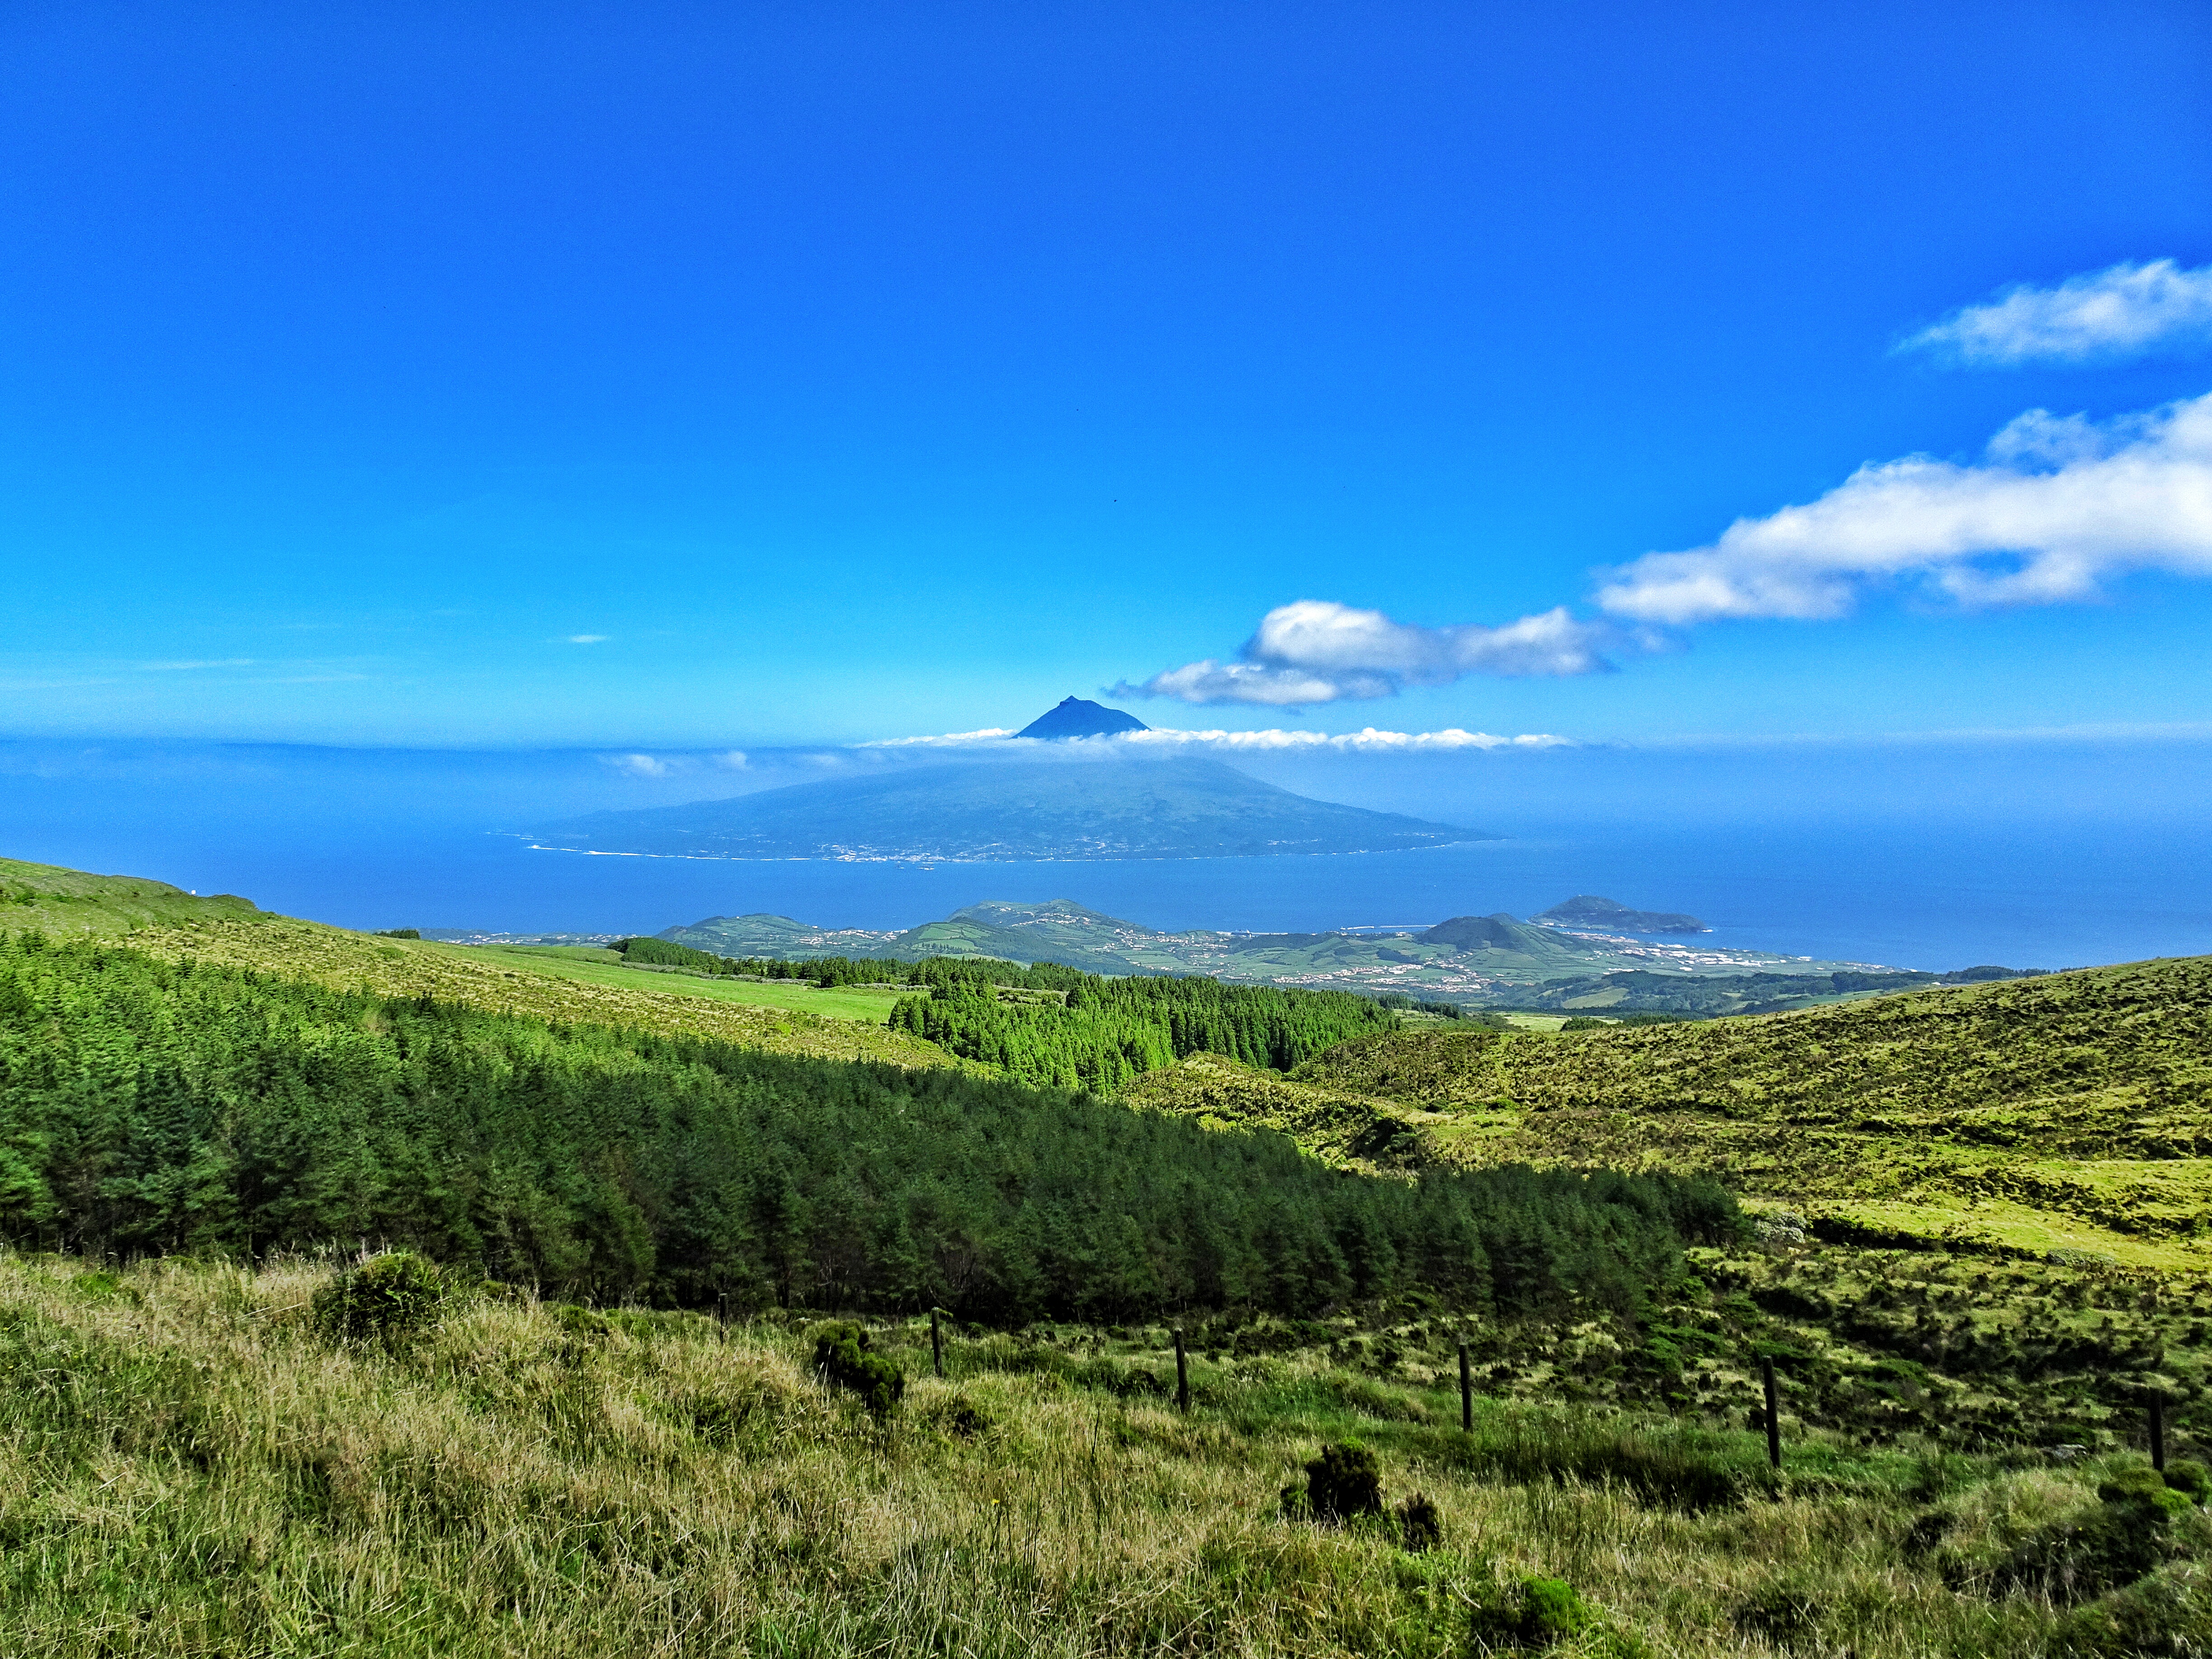 The Azores: 10 reasons why you must visit Europe's secret paradise4896 x 3672